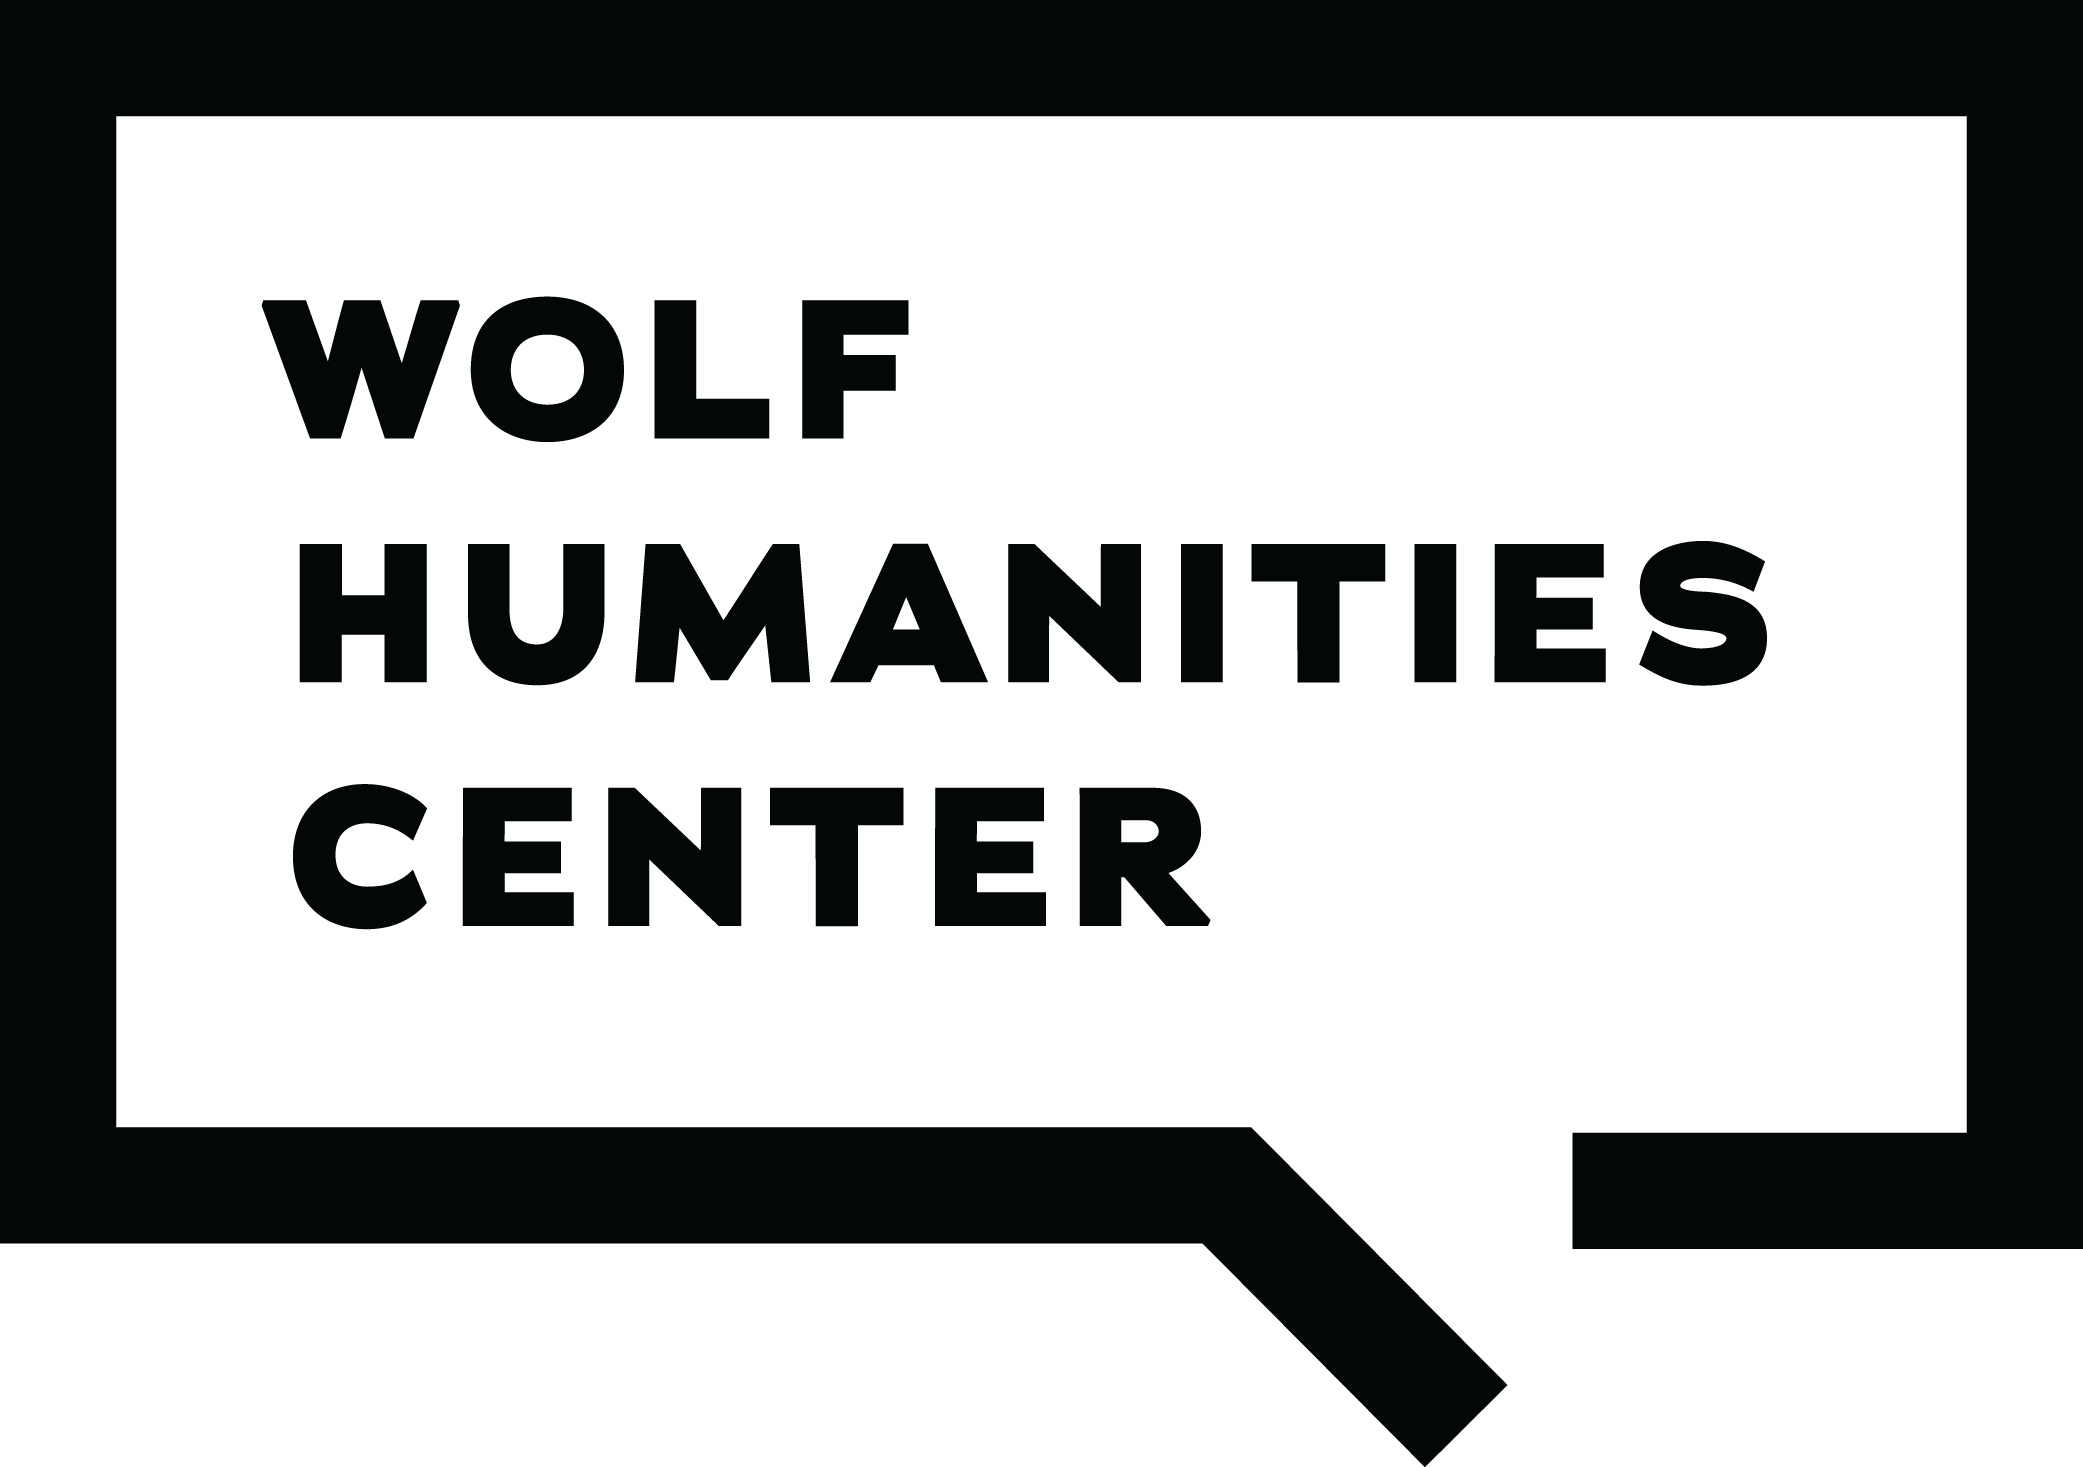 Afterlives Wolf Humanities Center